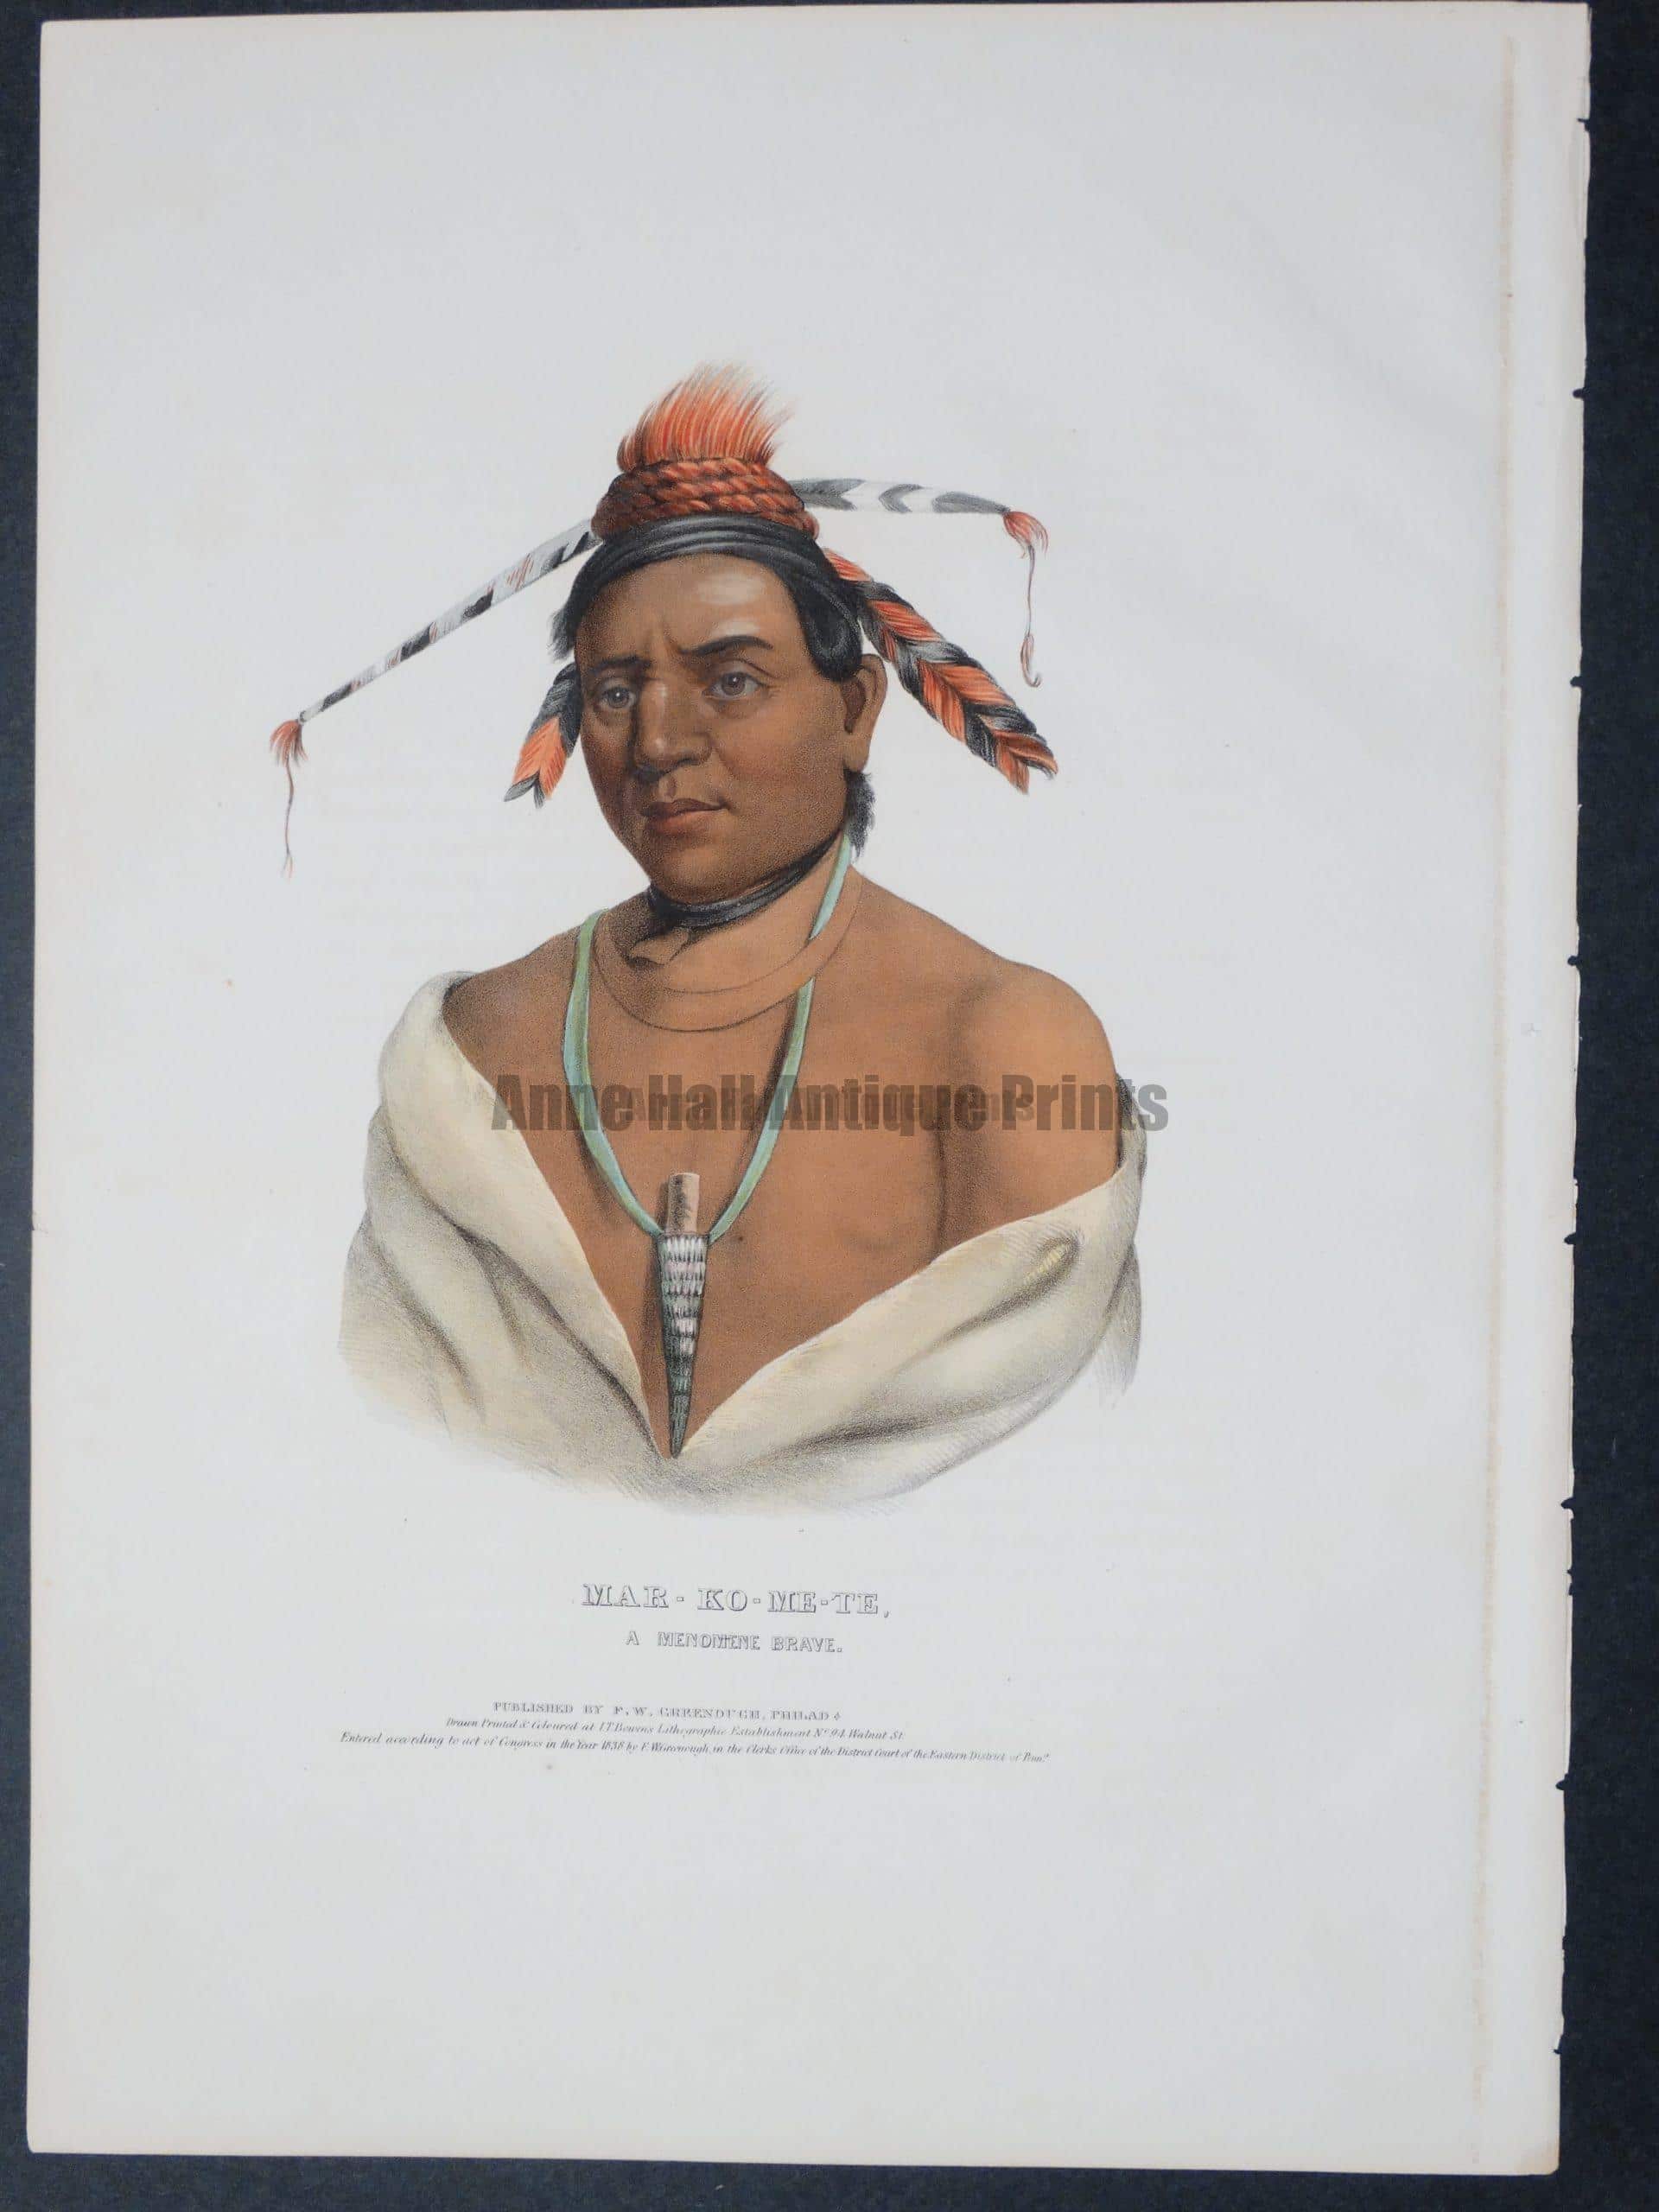 INDIAN Lithograph 1972 Vintage Full Color Art Plate "CHIEF AMISQUAM" NATIVE AM 